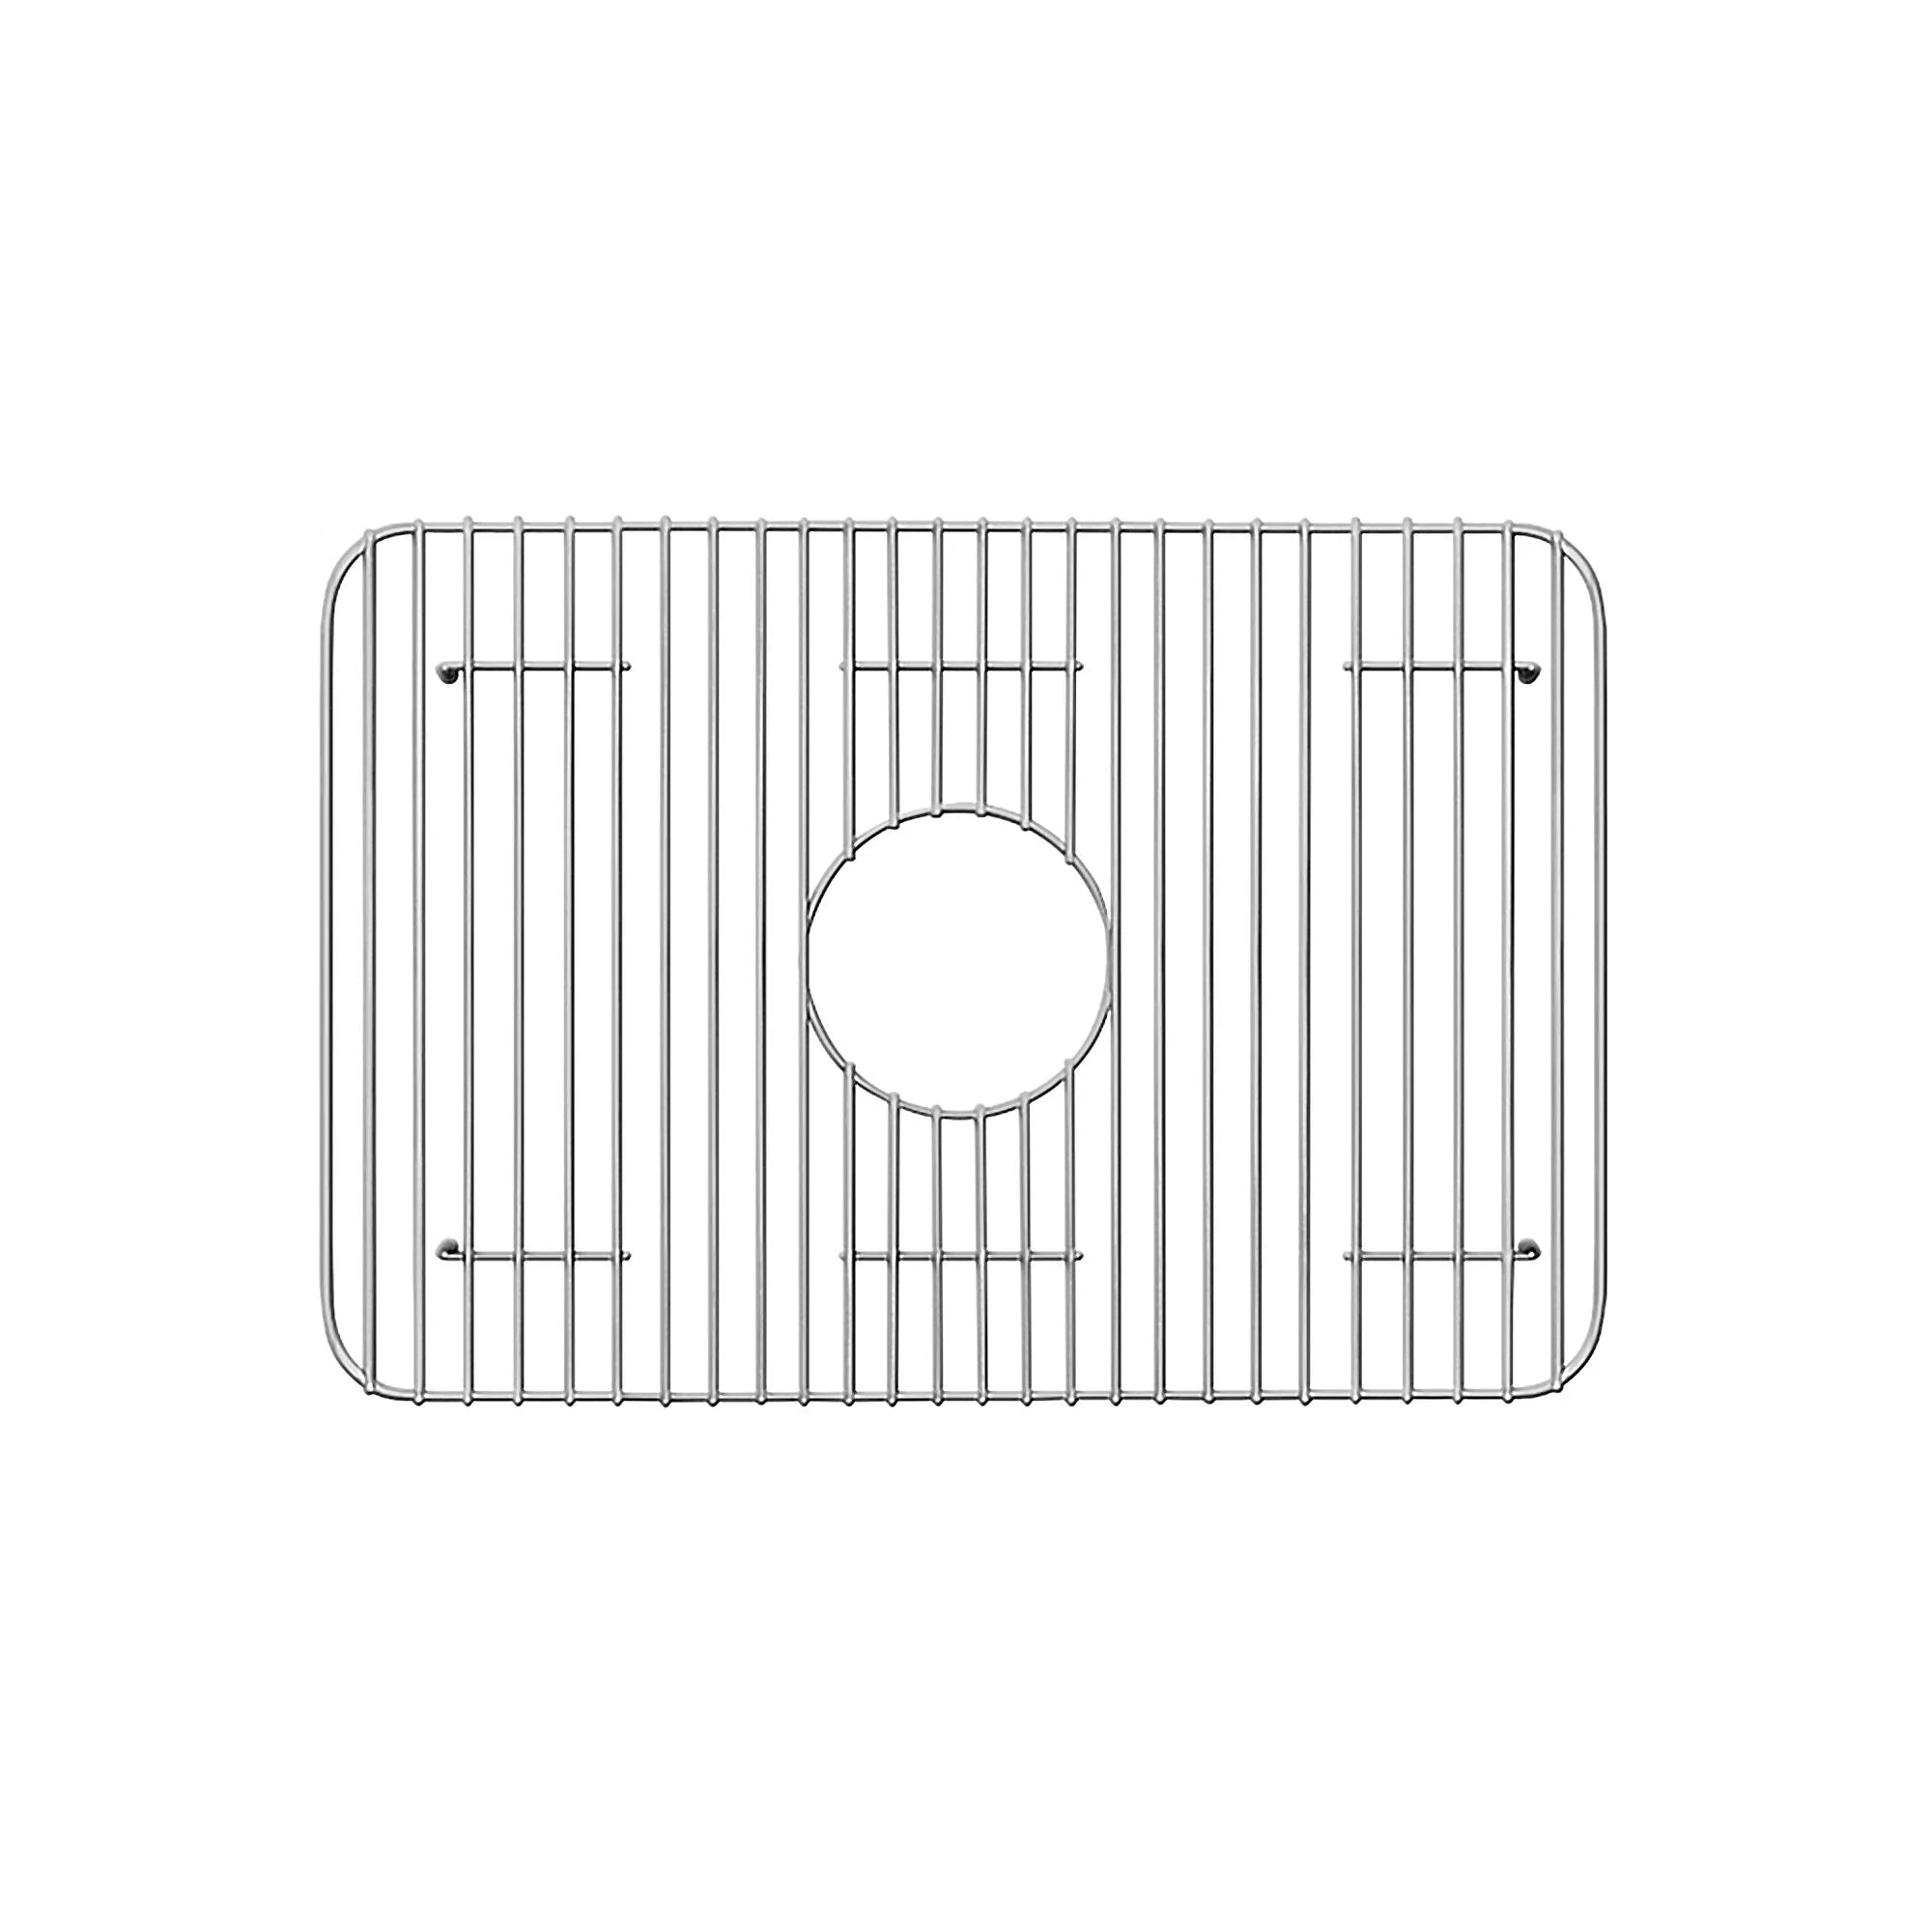 WHITEHAUS Stainless Steel Sink Grid for Use with Fireclay Sink – GR2916